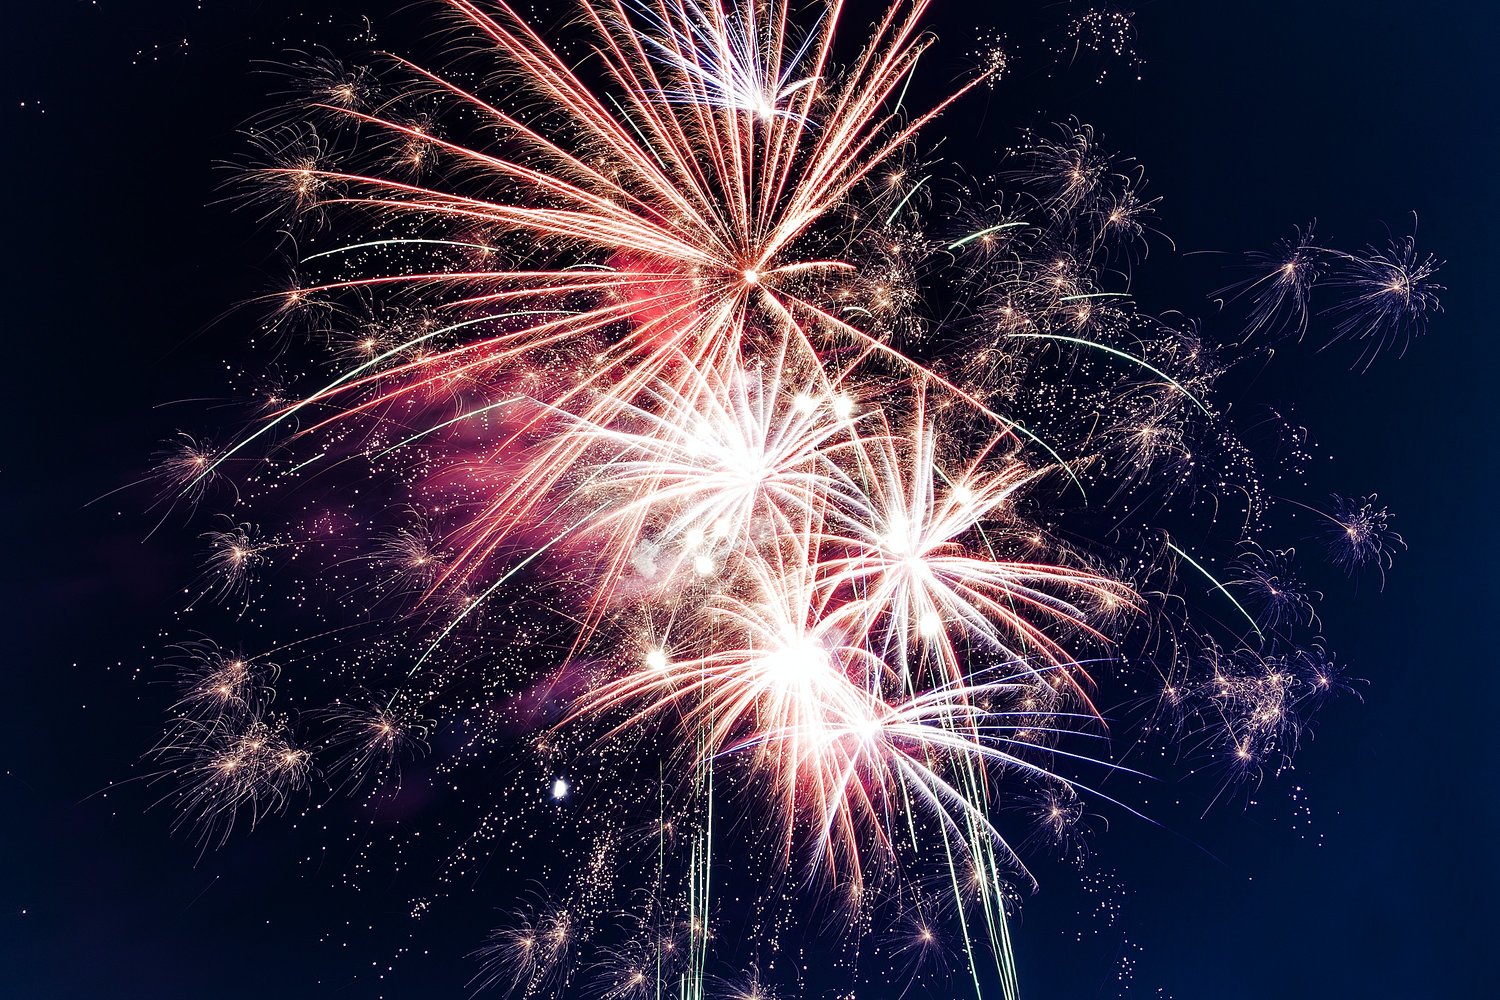 Following safety precautions can make a New Year’s fireworks display more enjoyable.